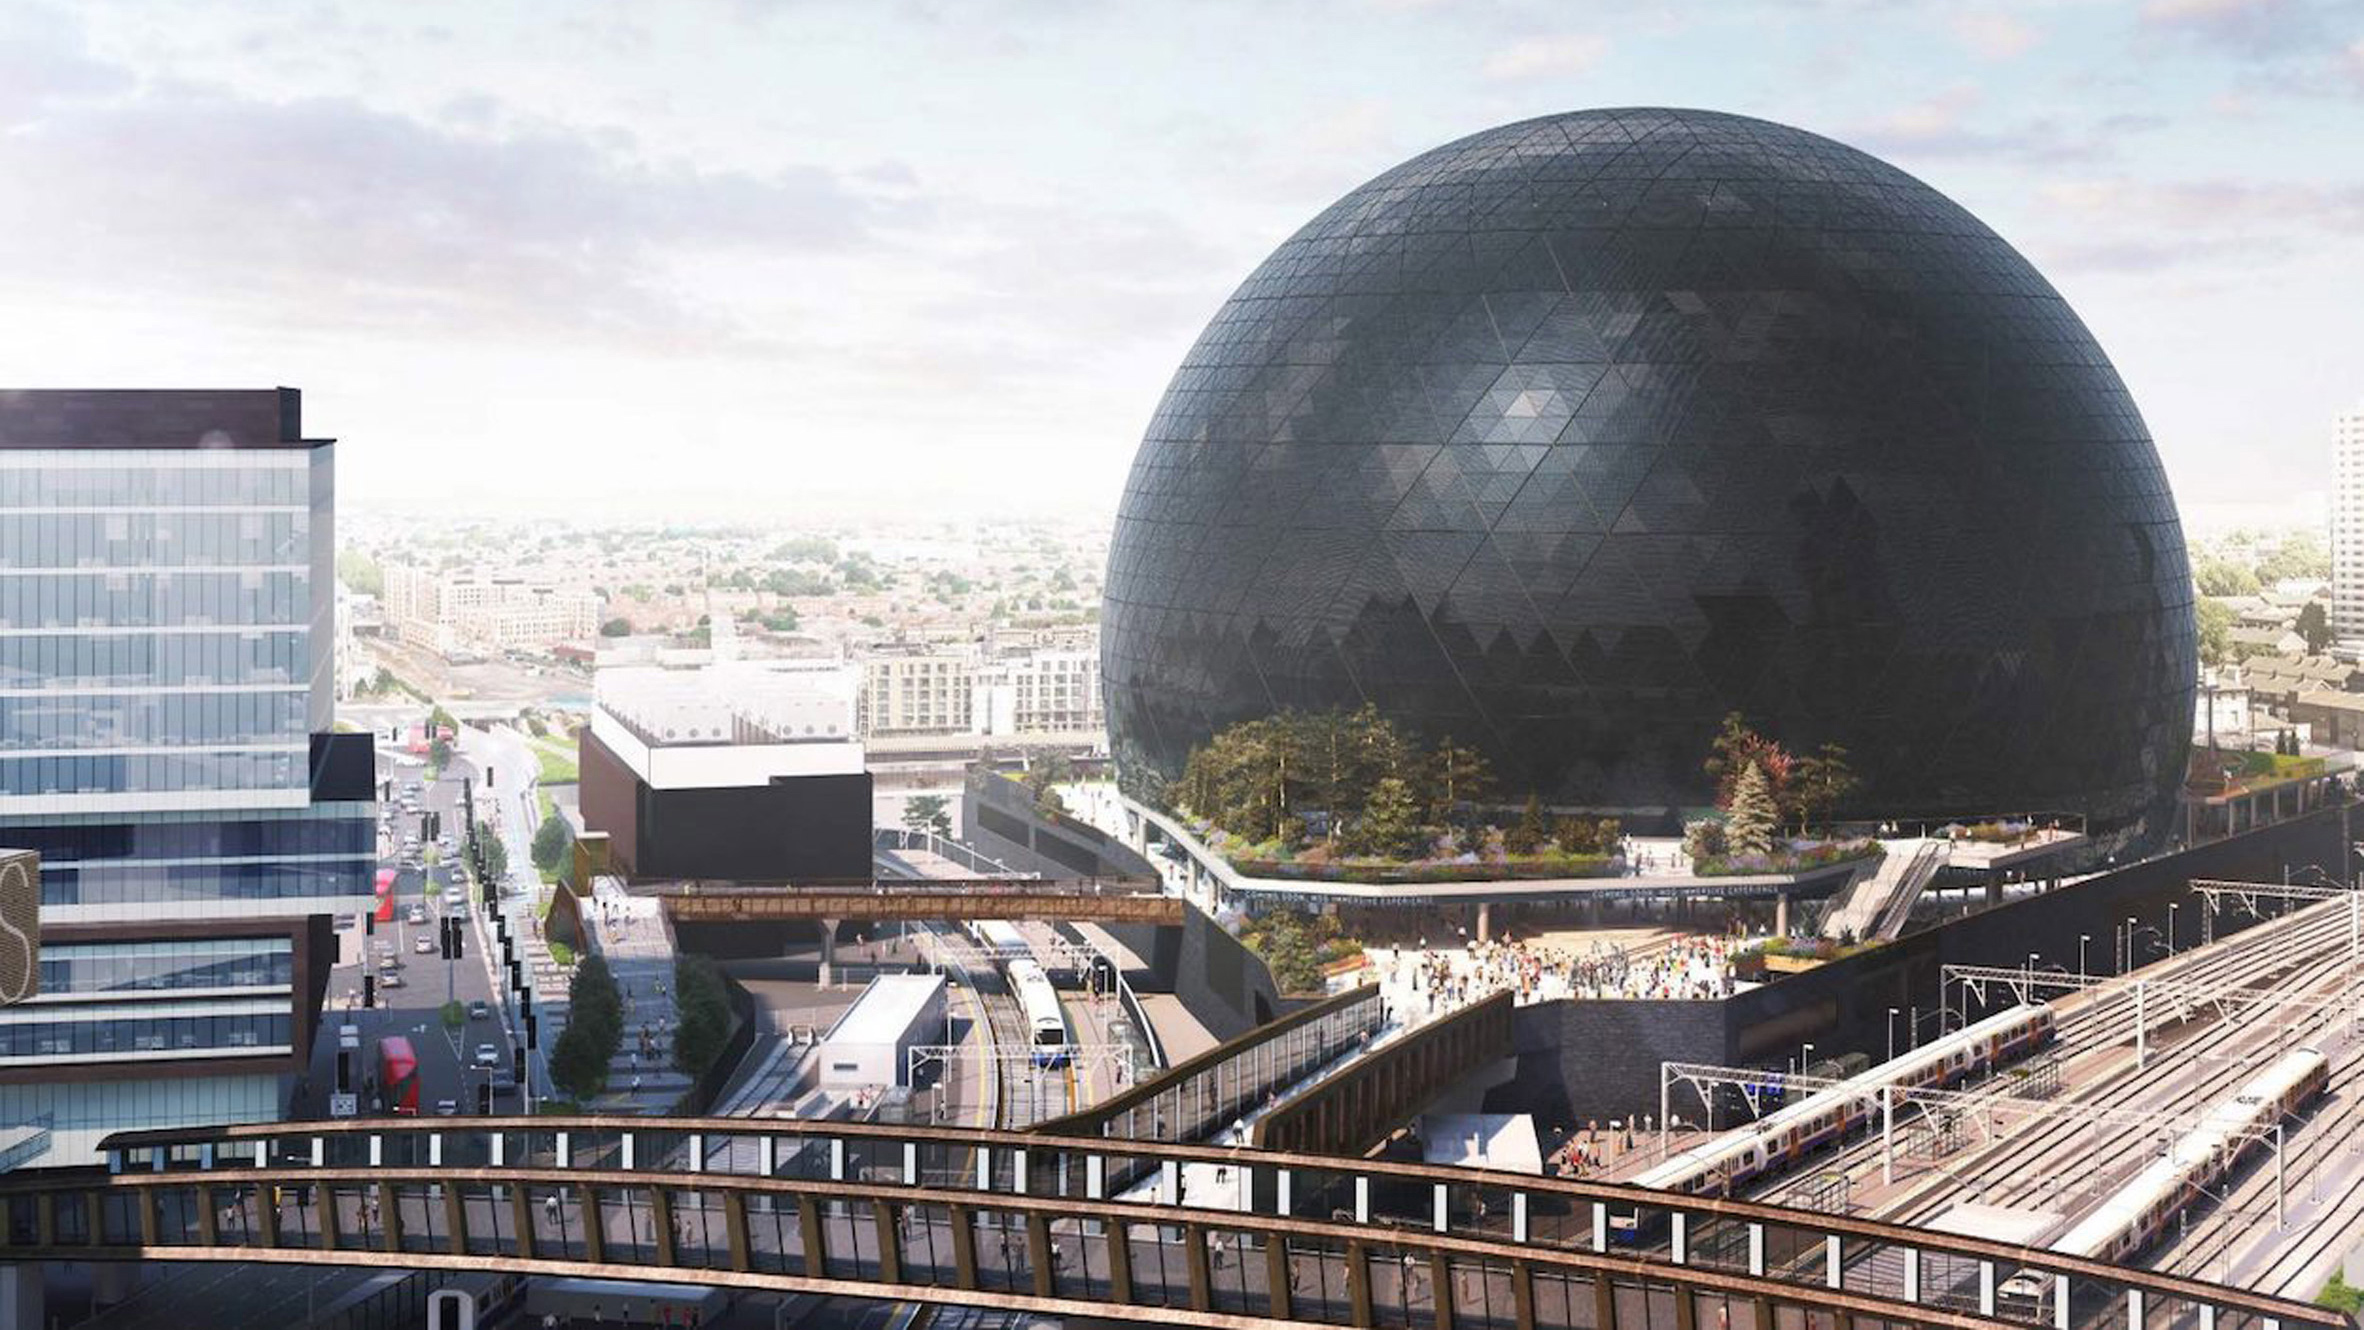 Populous’ spherical music venue gets go ahead to be built in London